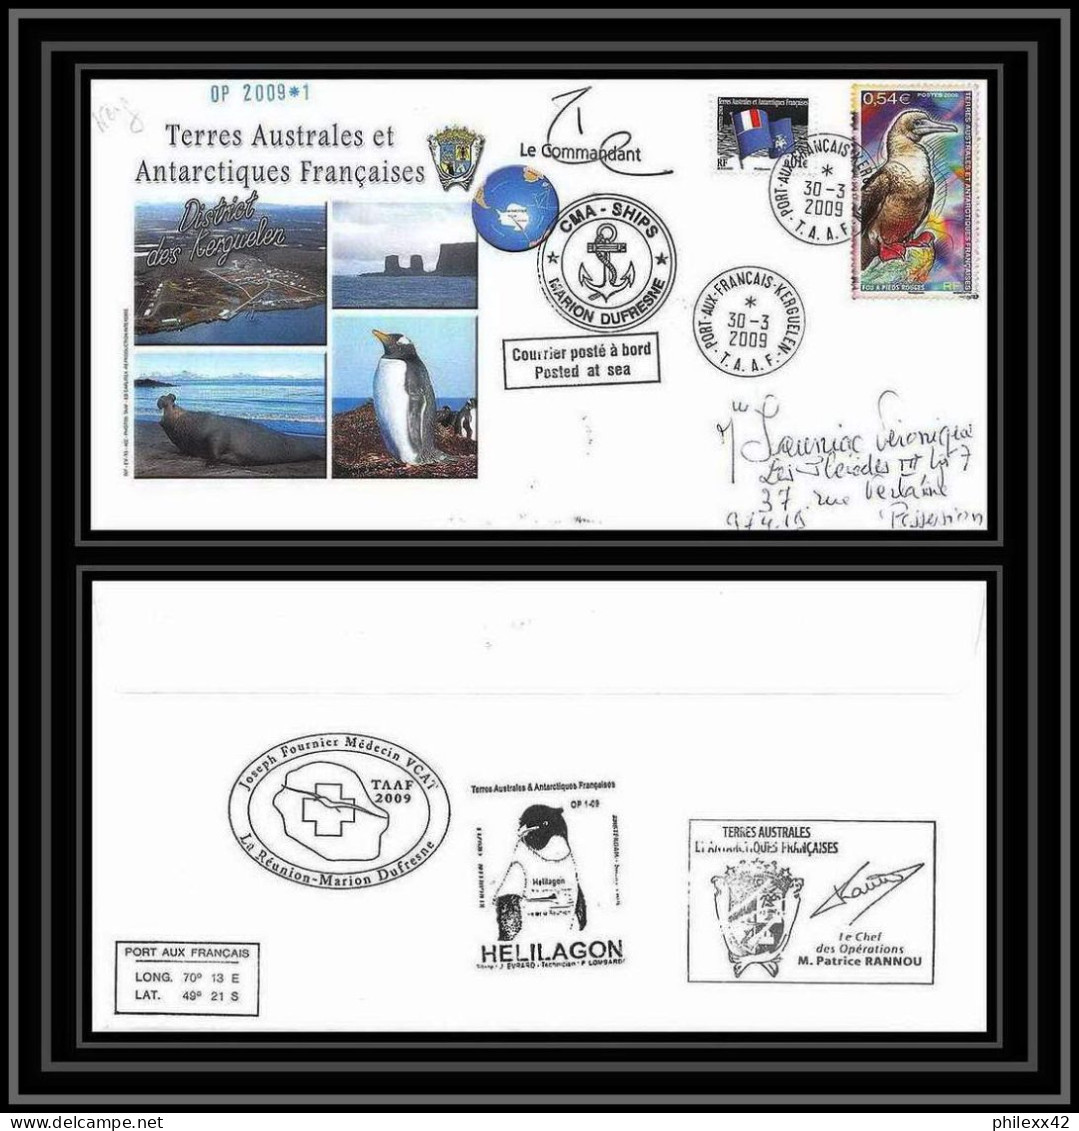 2899 Helilagon Dufresne Signé Signed OP 2009/1 KERGUELEN 30/3/2009 N°515 ANTARCTIC Terres Australes (taaf) Lettre Cover - Helicopters